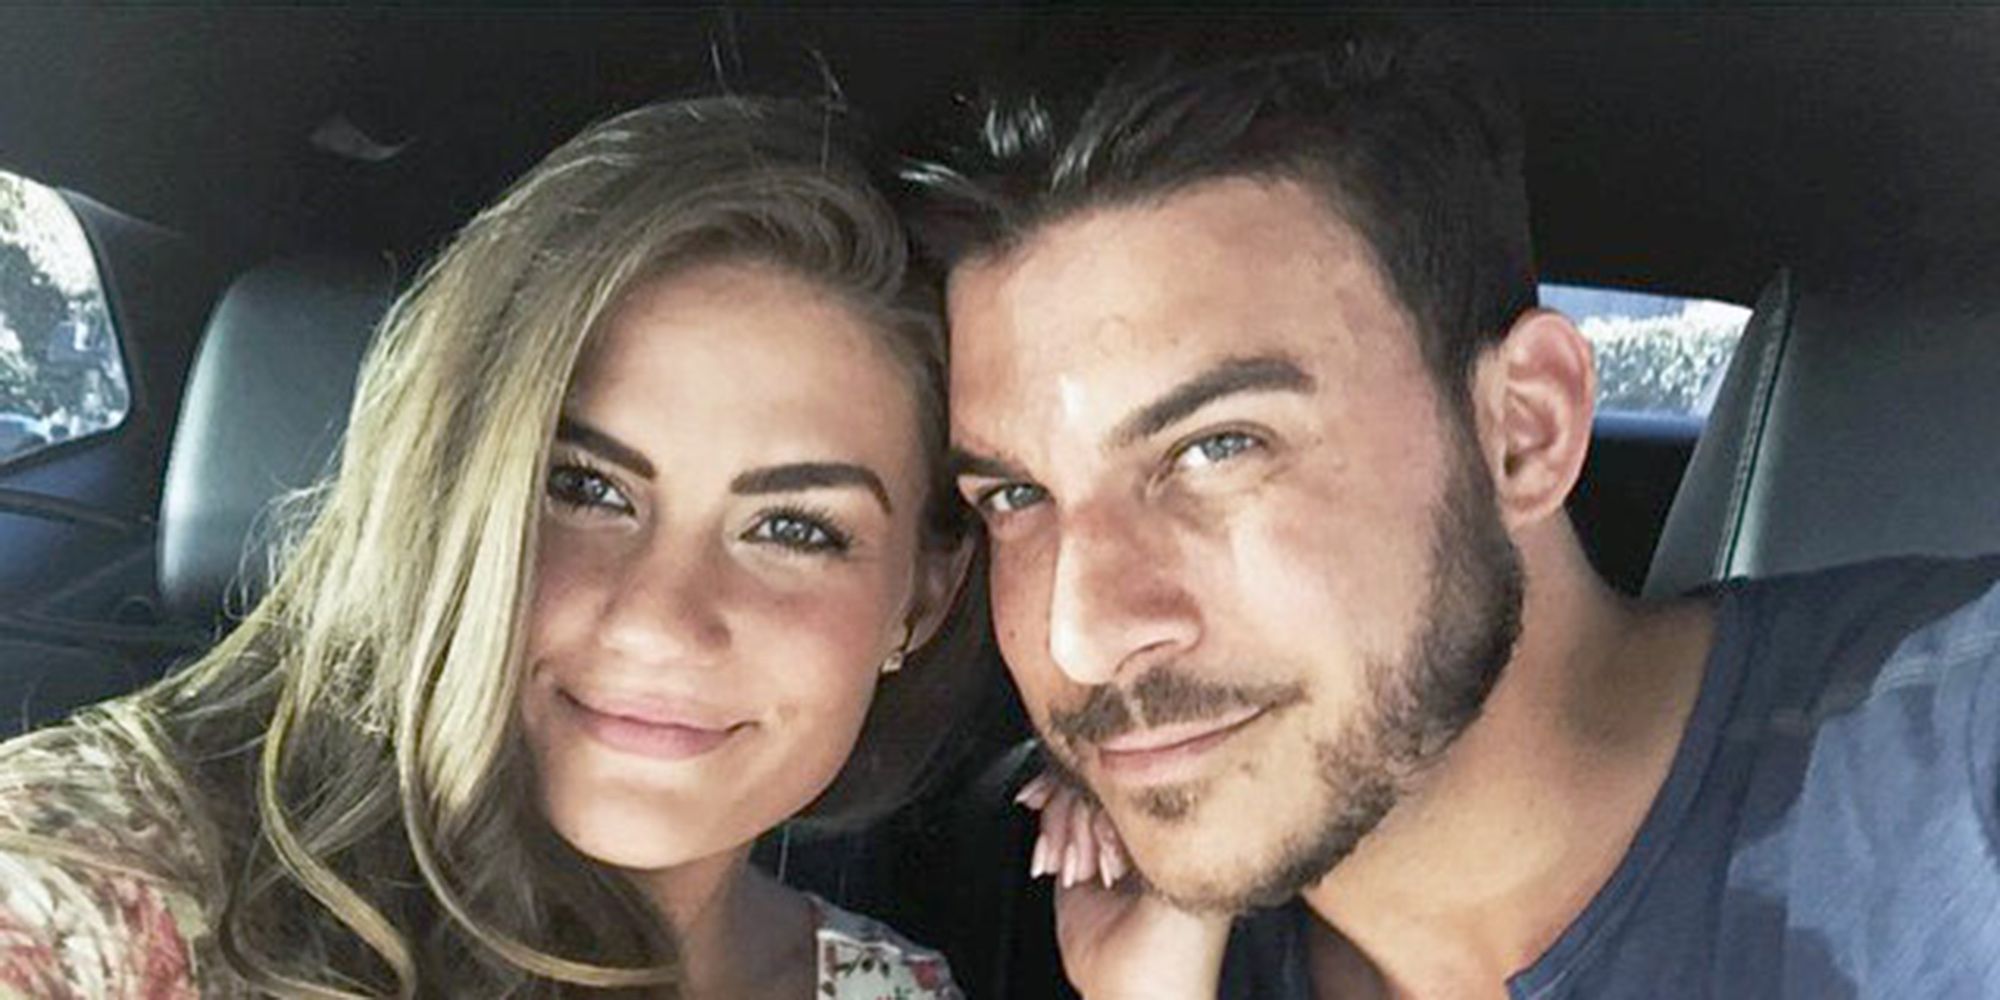 Jax Taylor and Brittany Cartwright from Vanderpump Rules smiling in their vehicle